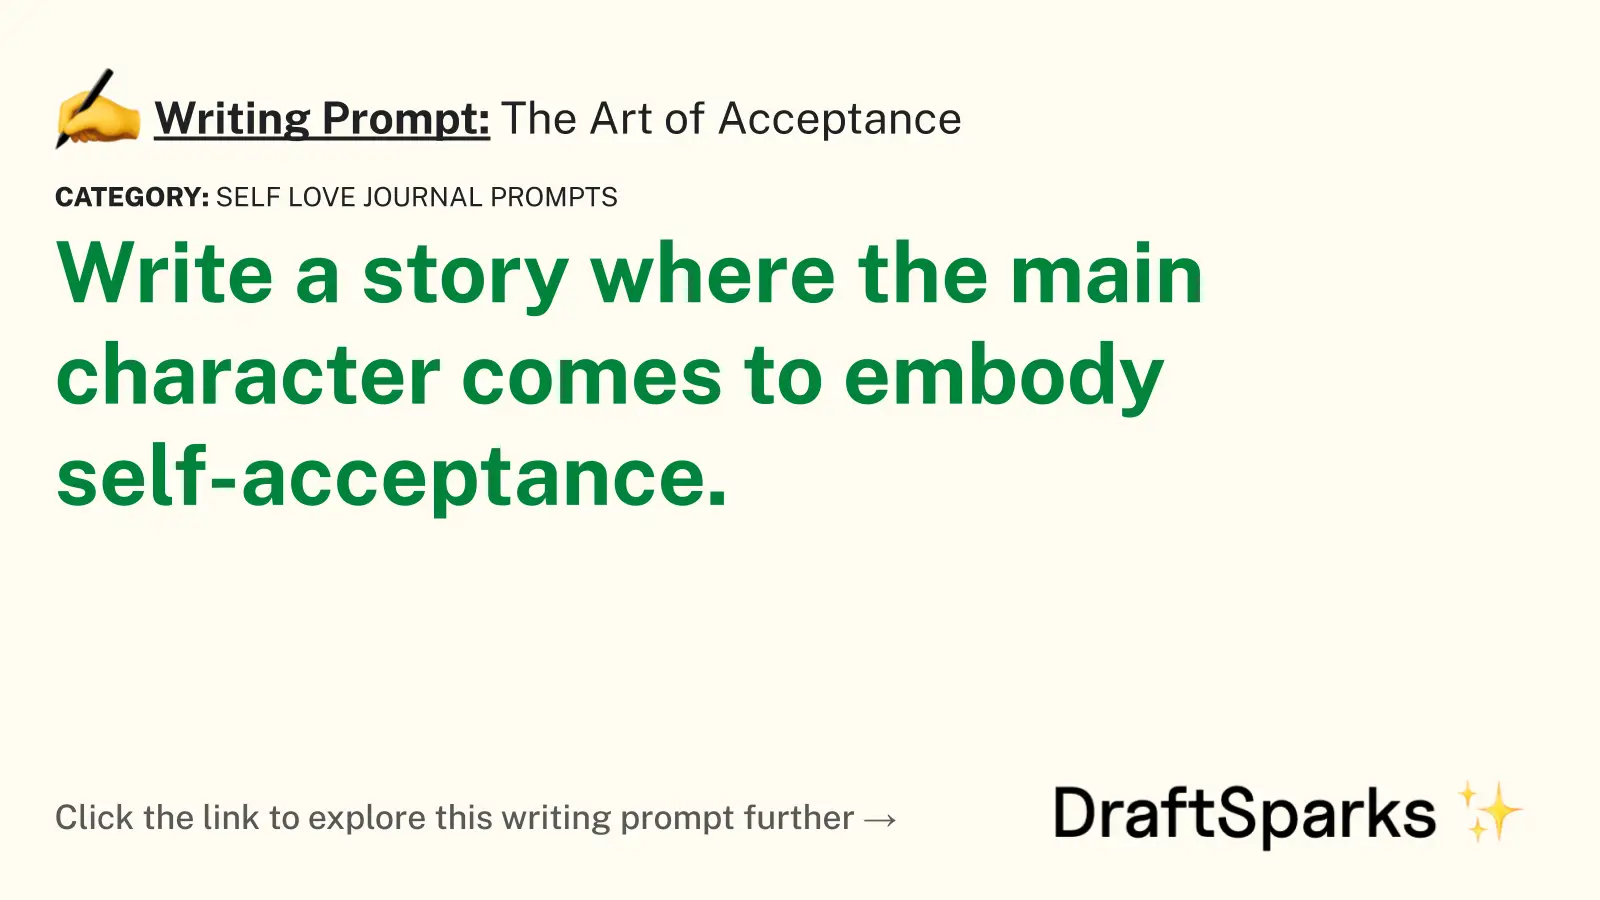 The Art of Acceptance